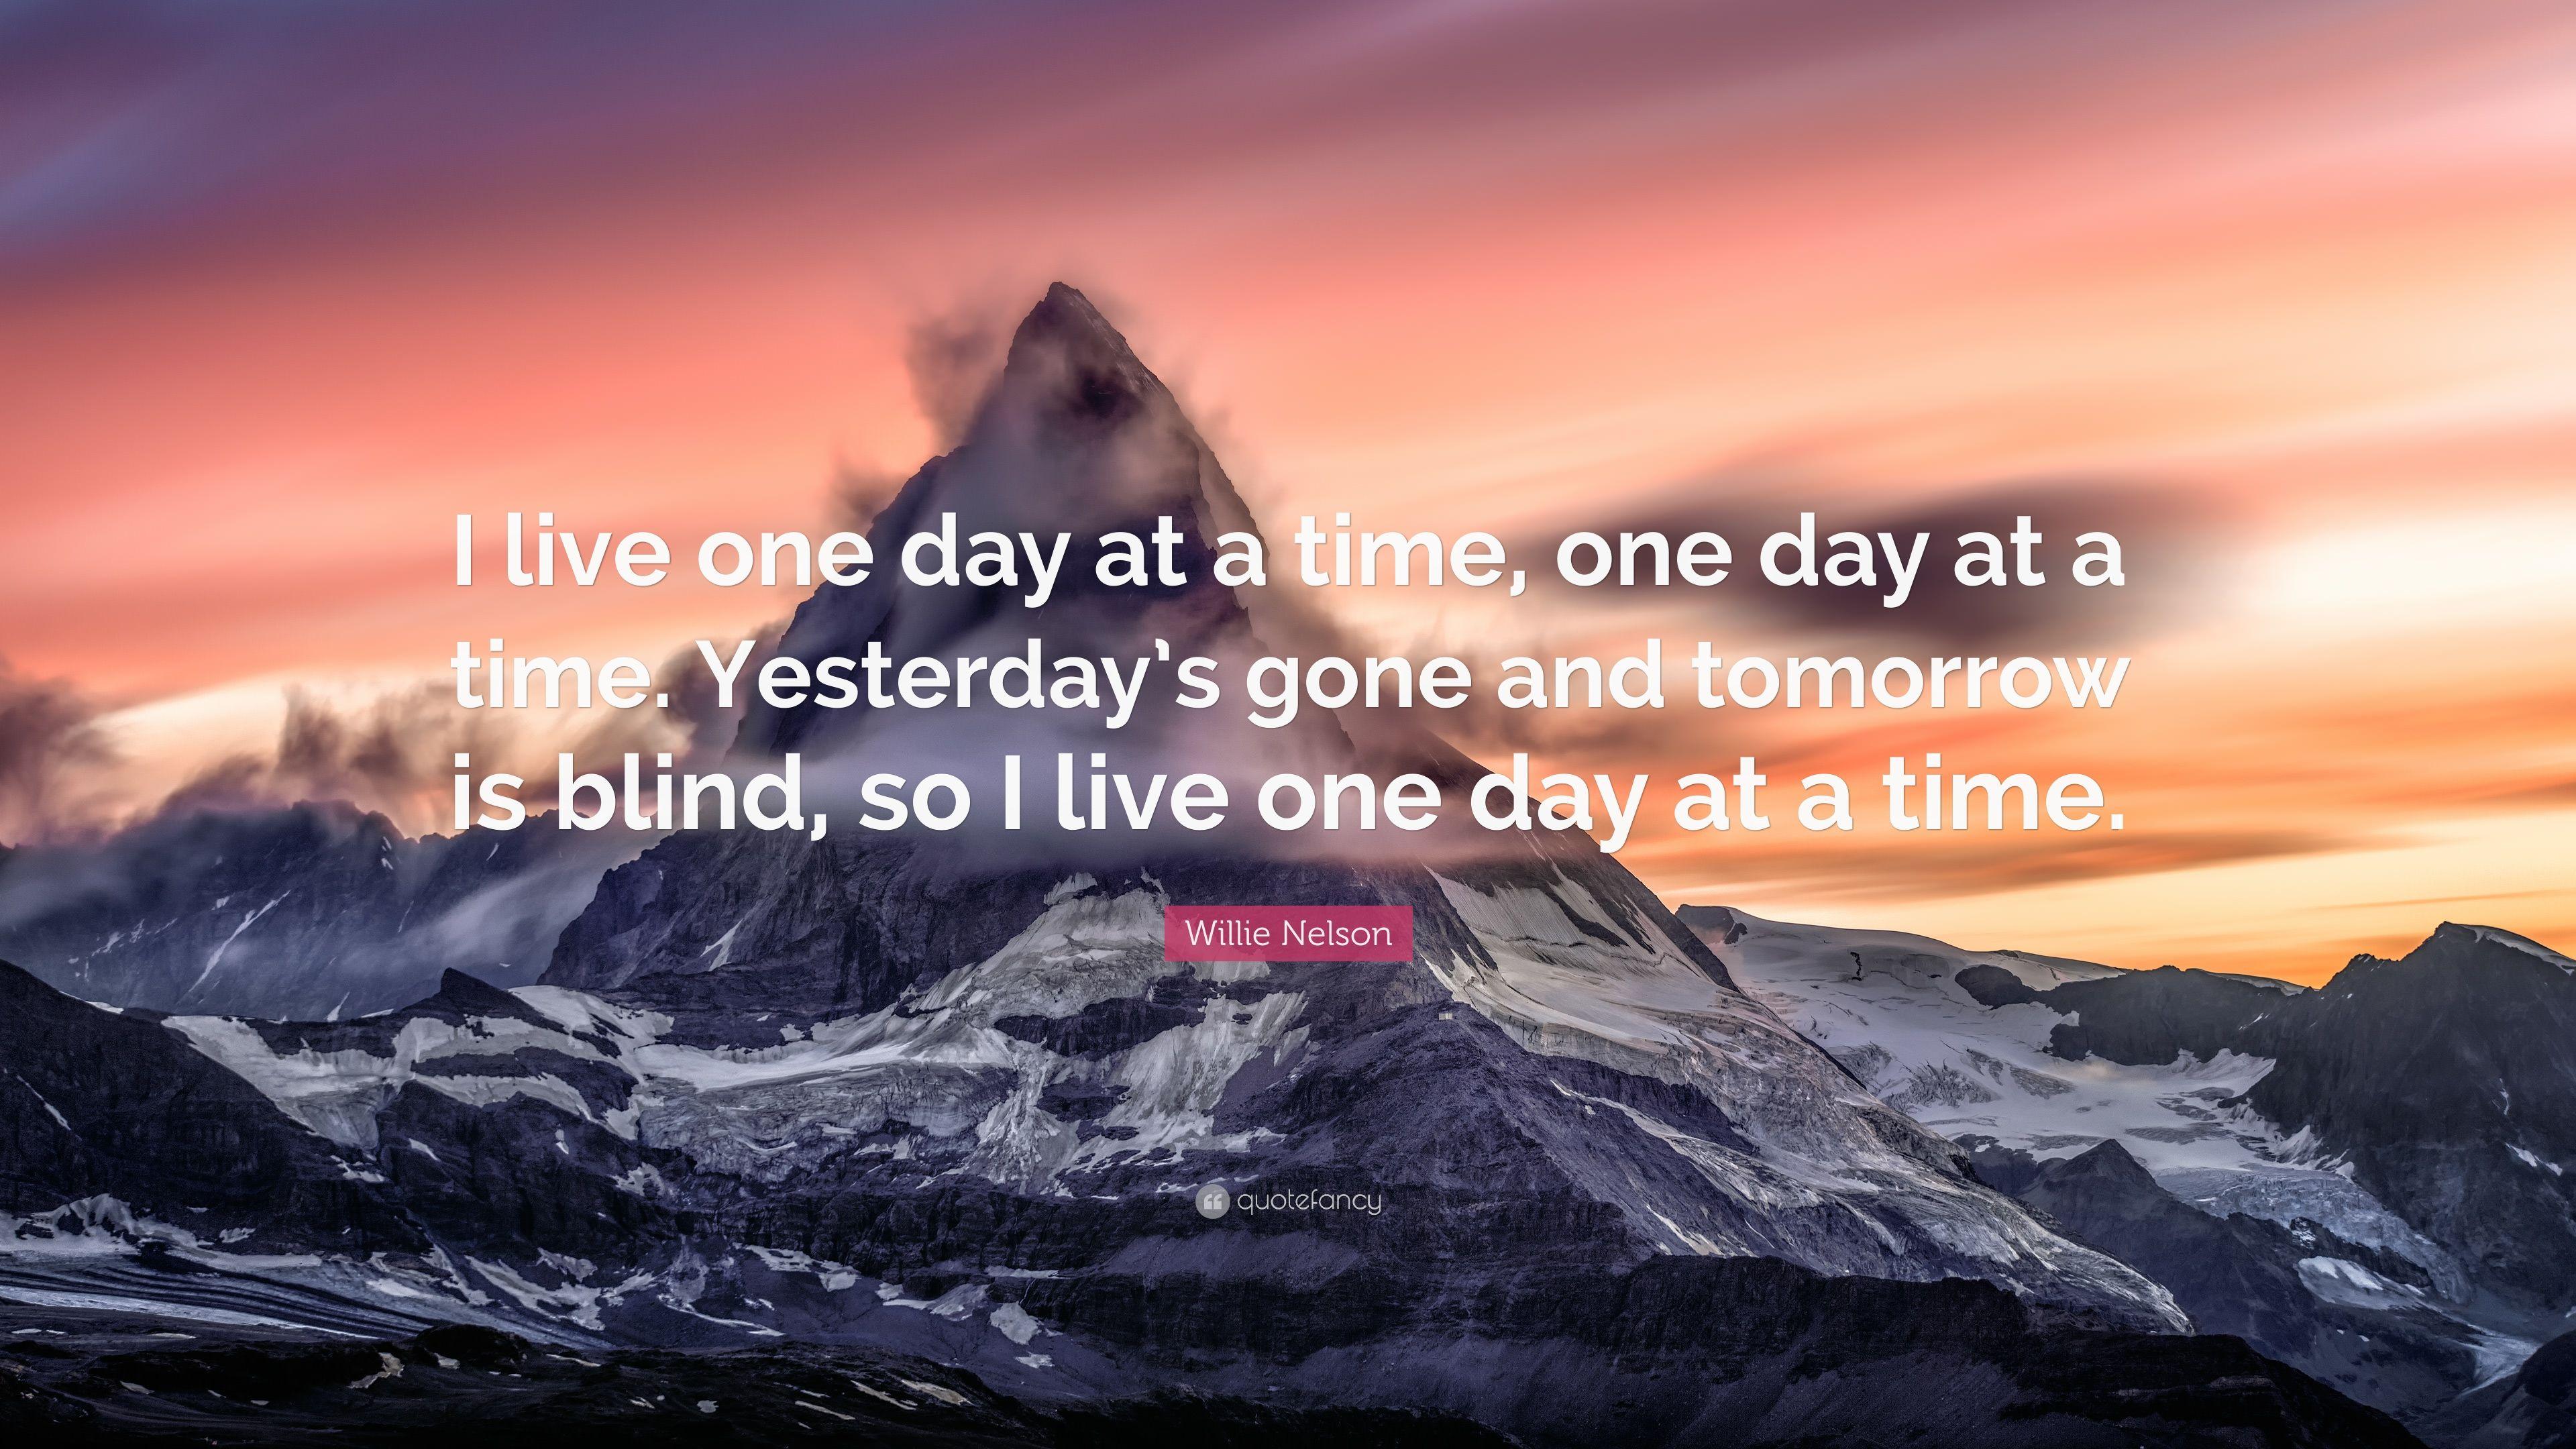 Willie Nelson Quote: “I live one day at a time, one day at a time